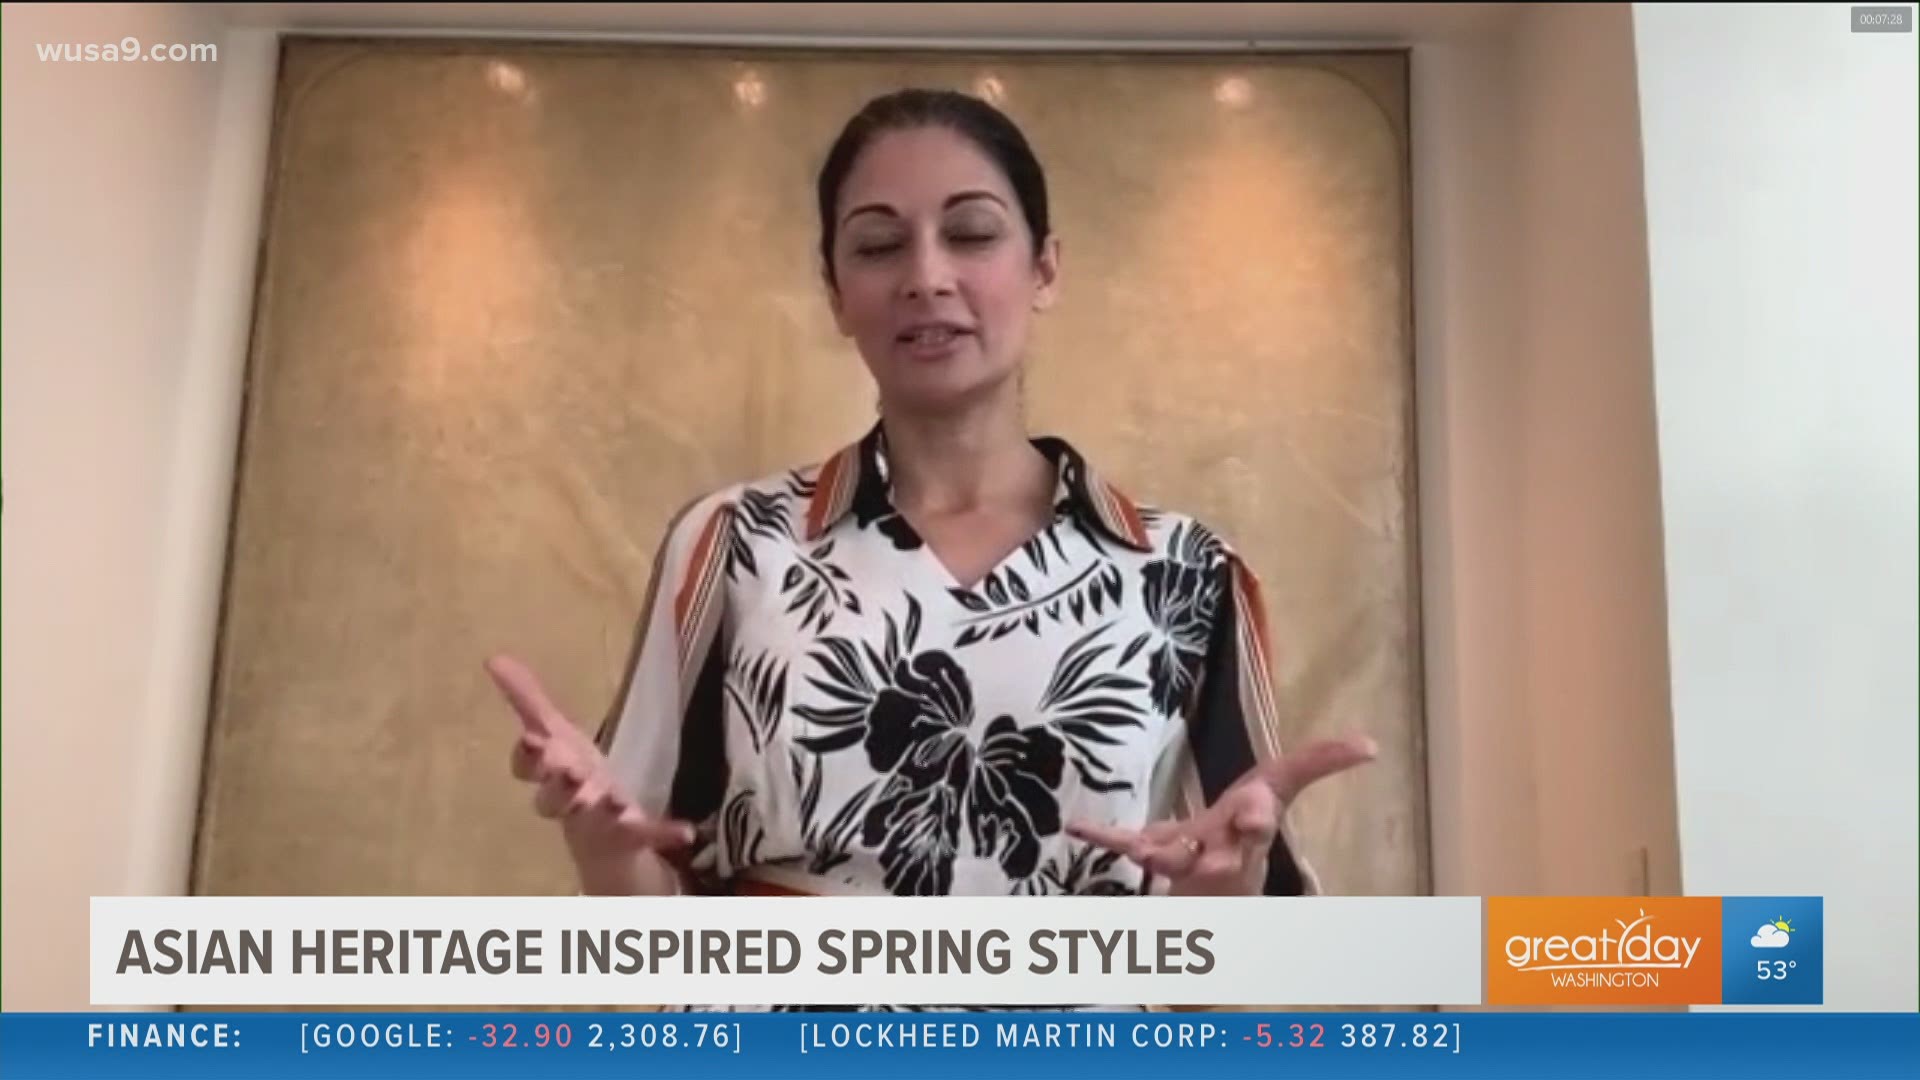 Fashion expert, Aysha Saeed shares some of her Asian inspired fashions from "Dressing for the Now".